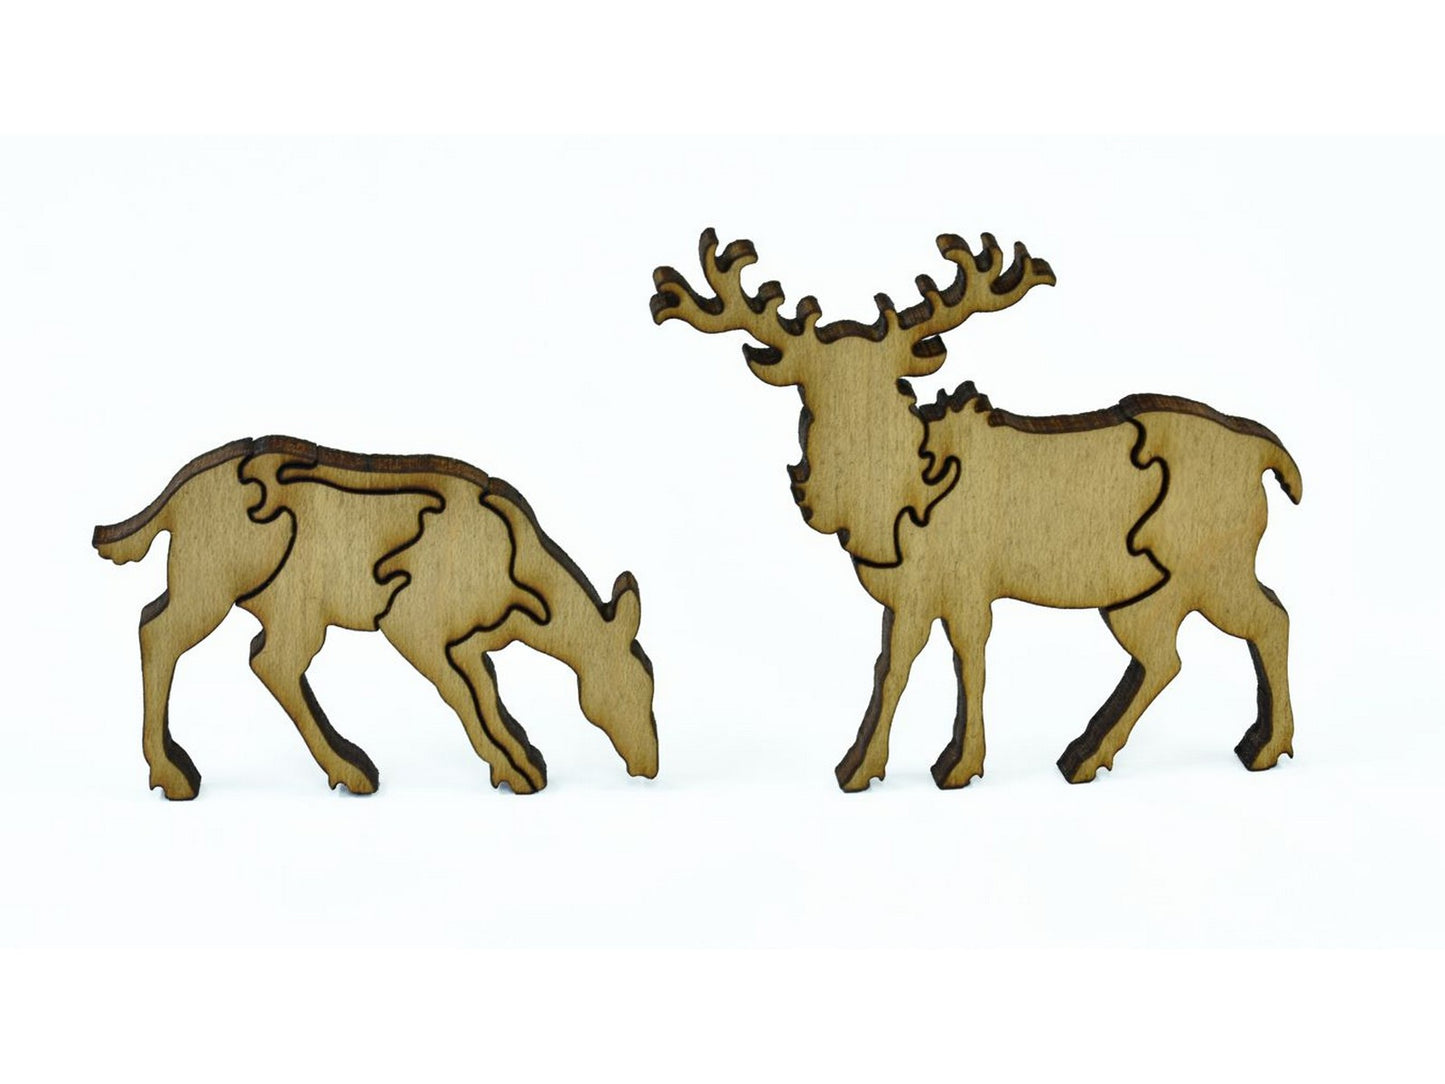 A closeup of pieces in the shape of deer.